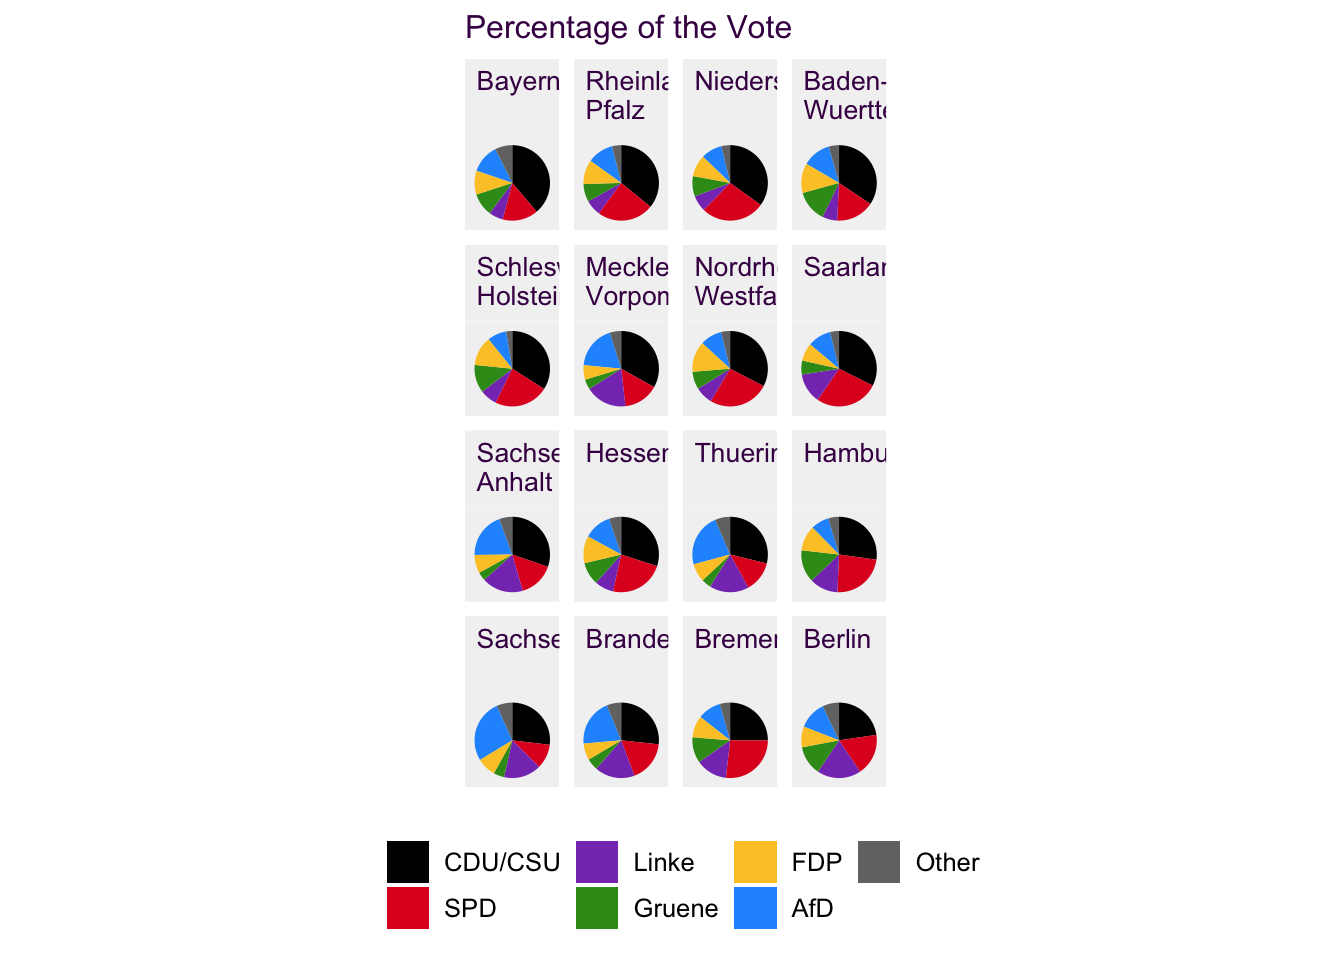 16 pie charts, each consisting of 6 differnt colors is overwhelming for the reader. It's also difficult to make comparisons between distant sub-plots and with slices that are in different orientations.